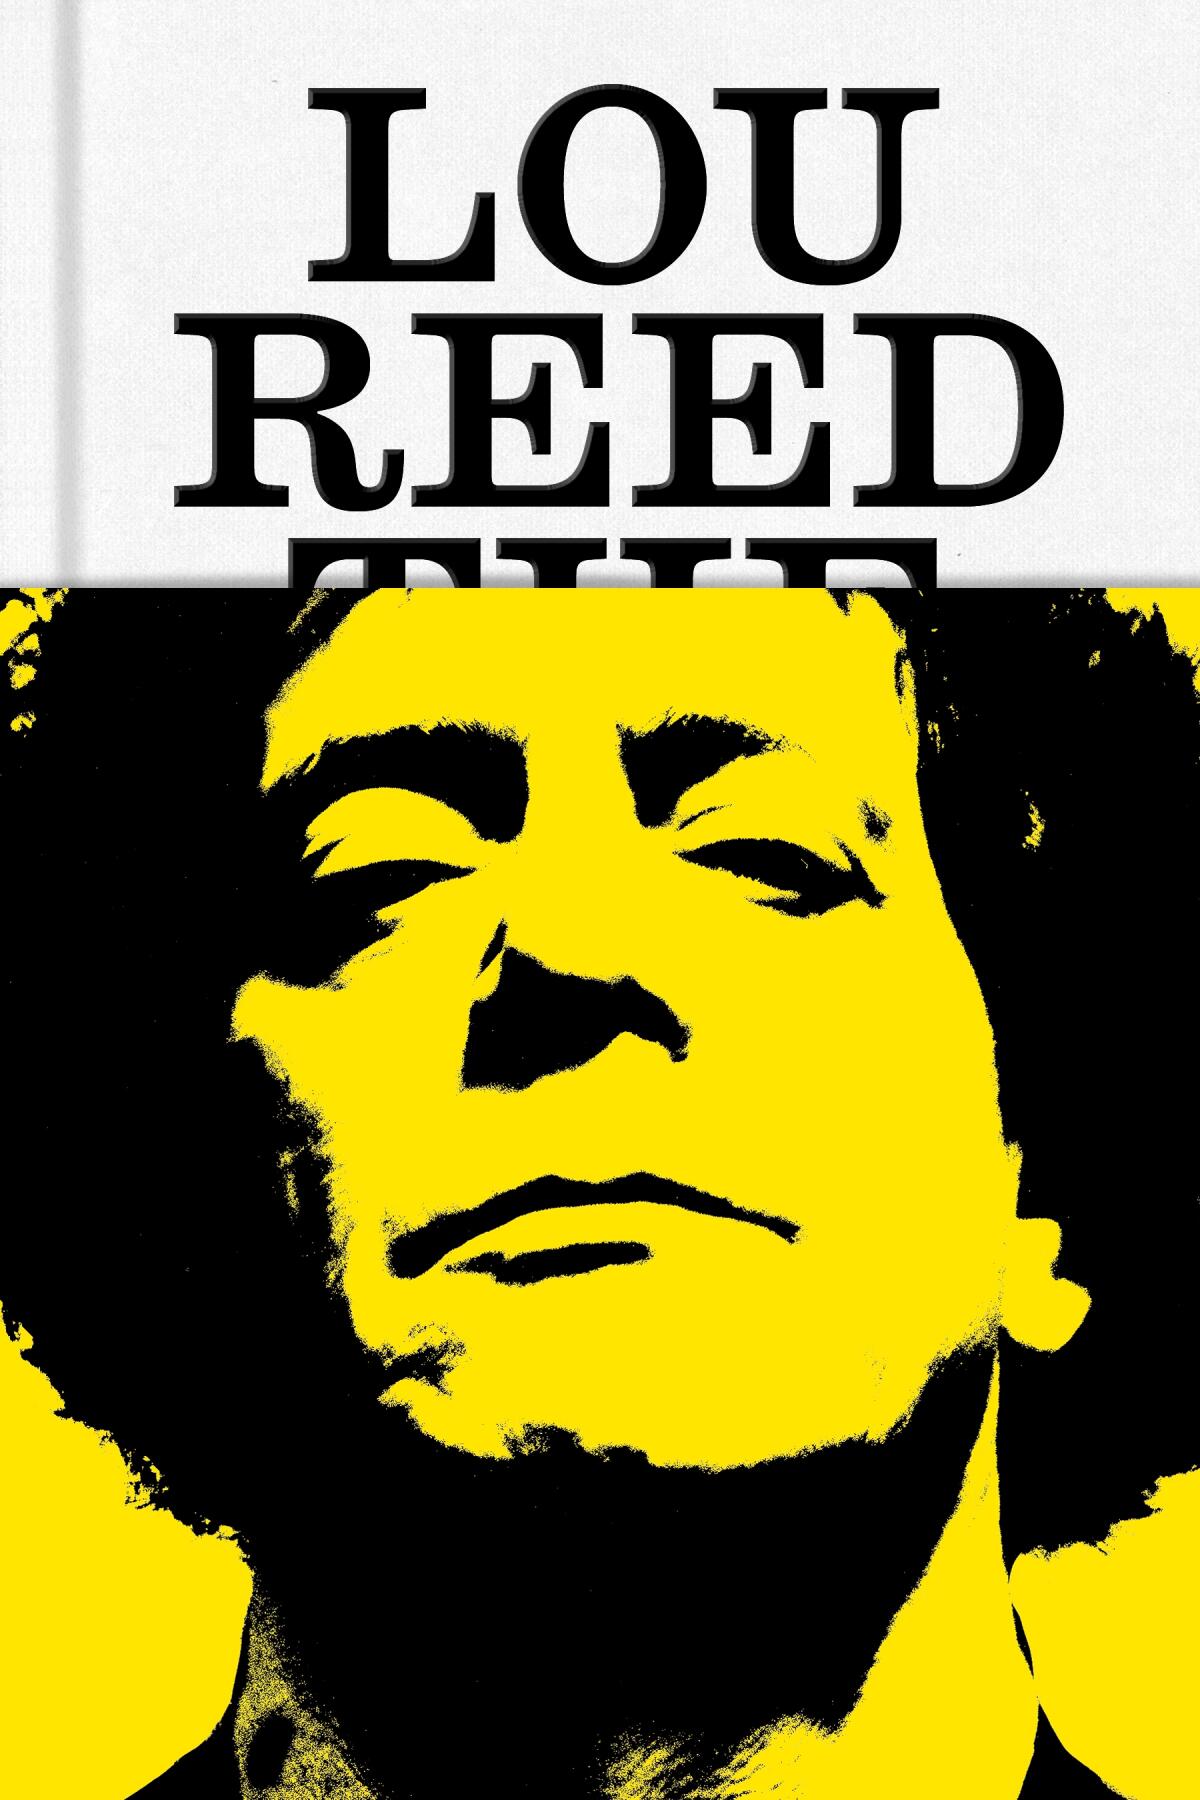 The cover of "Lou Reed: The King of New York" by Will Hermes, featuring a yellow portrait of Reed.